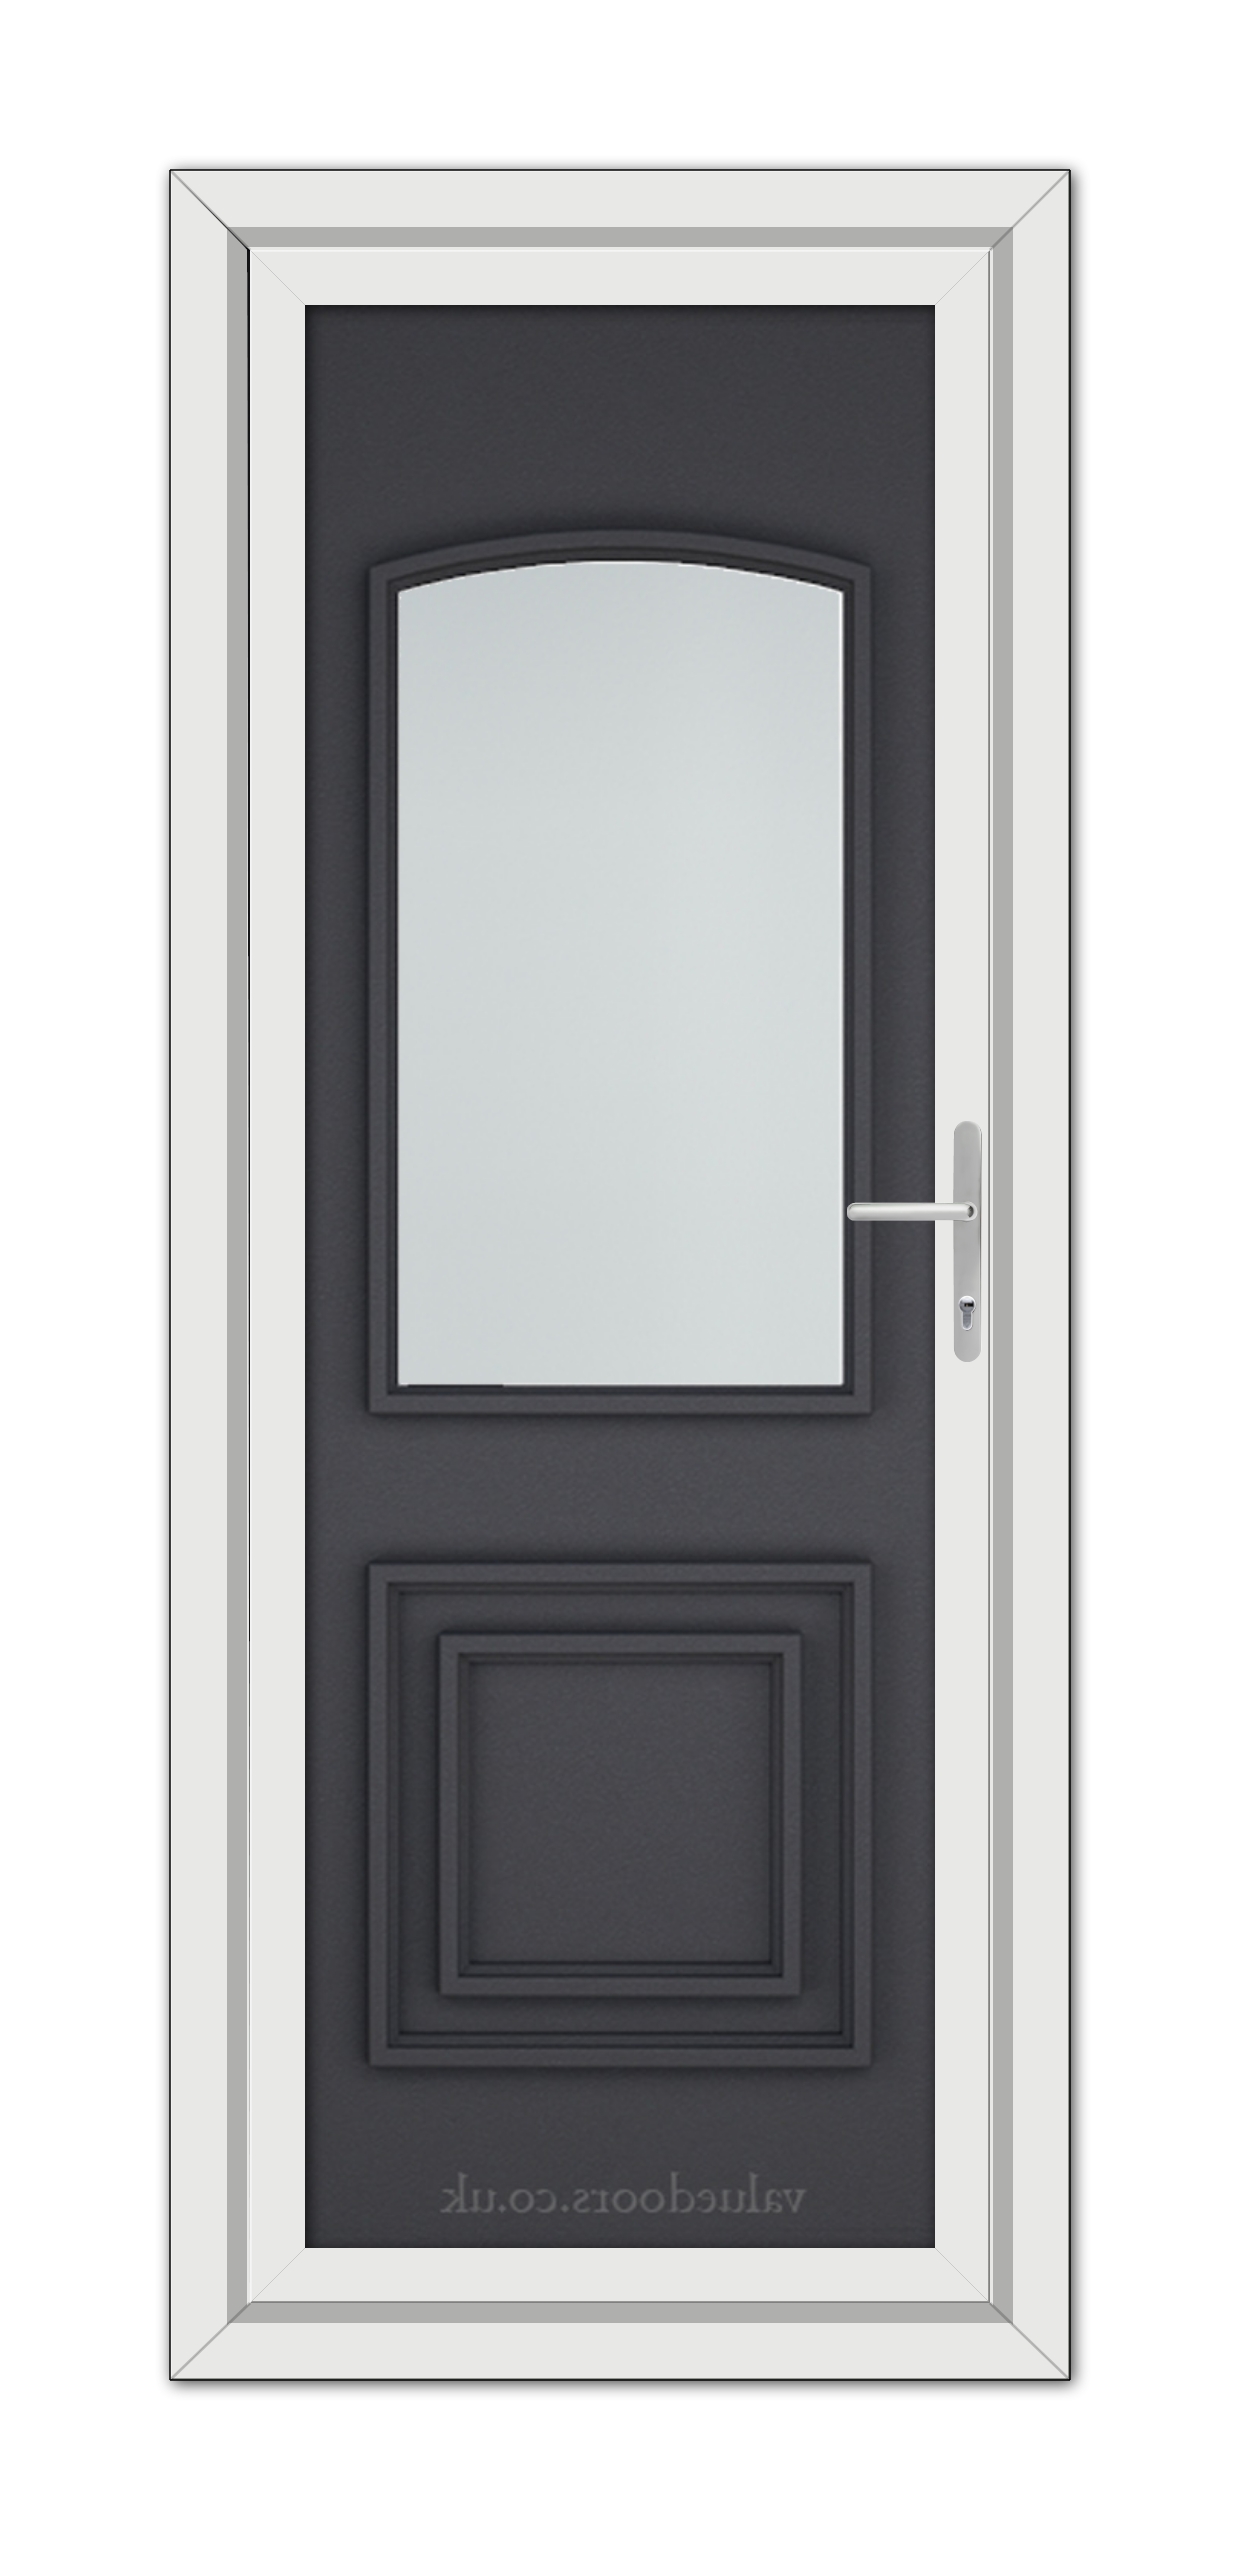 A Grey Grained Balmoral Classic uPVC Door featuring a narrow vertical window, a prominent dark gray panel, and a metallic handle, set within a white frame.